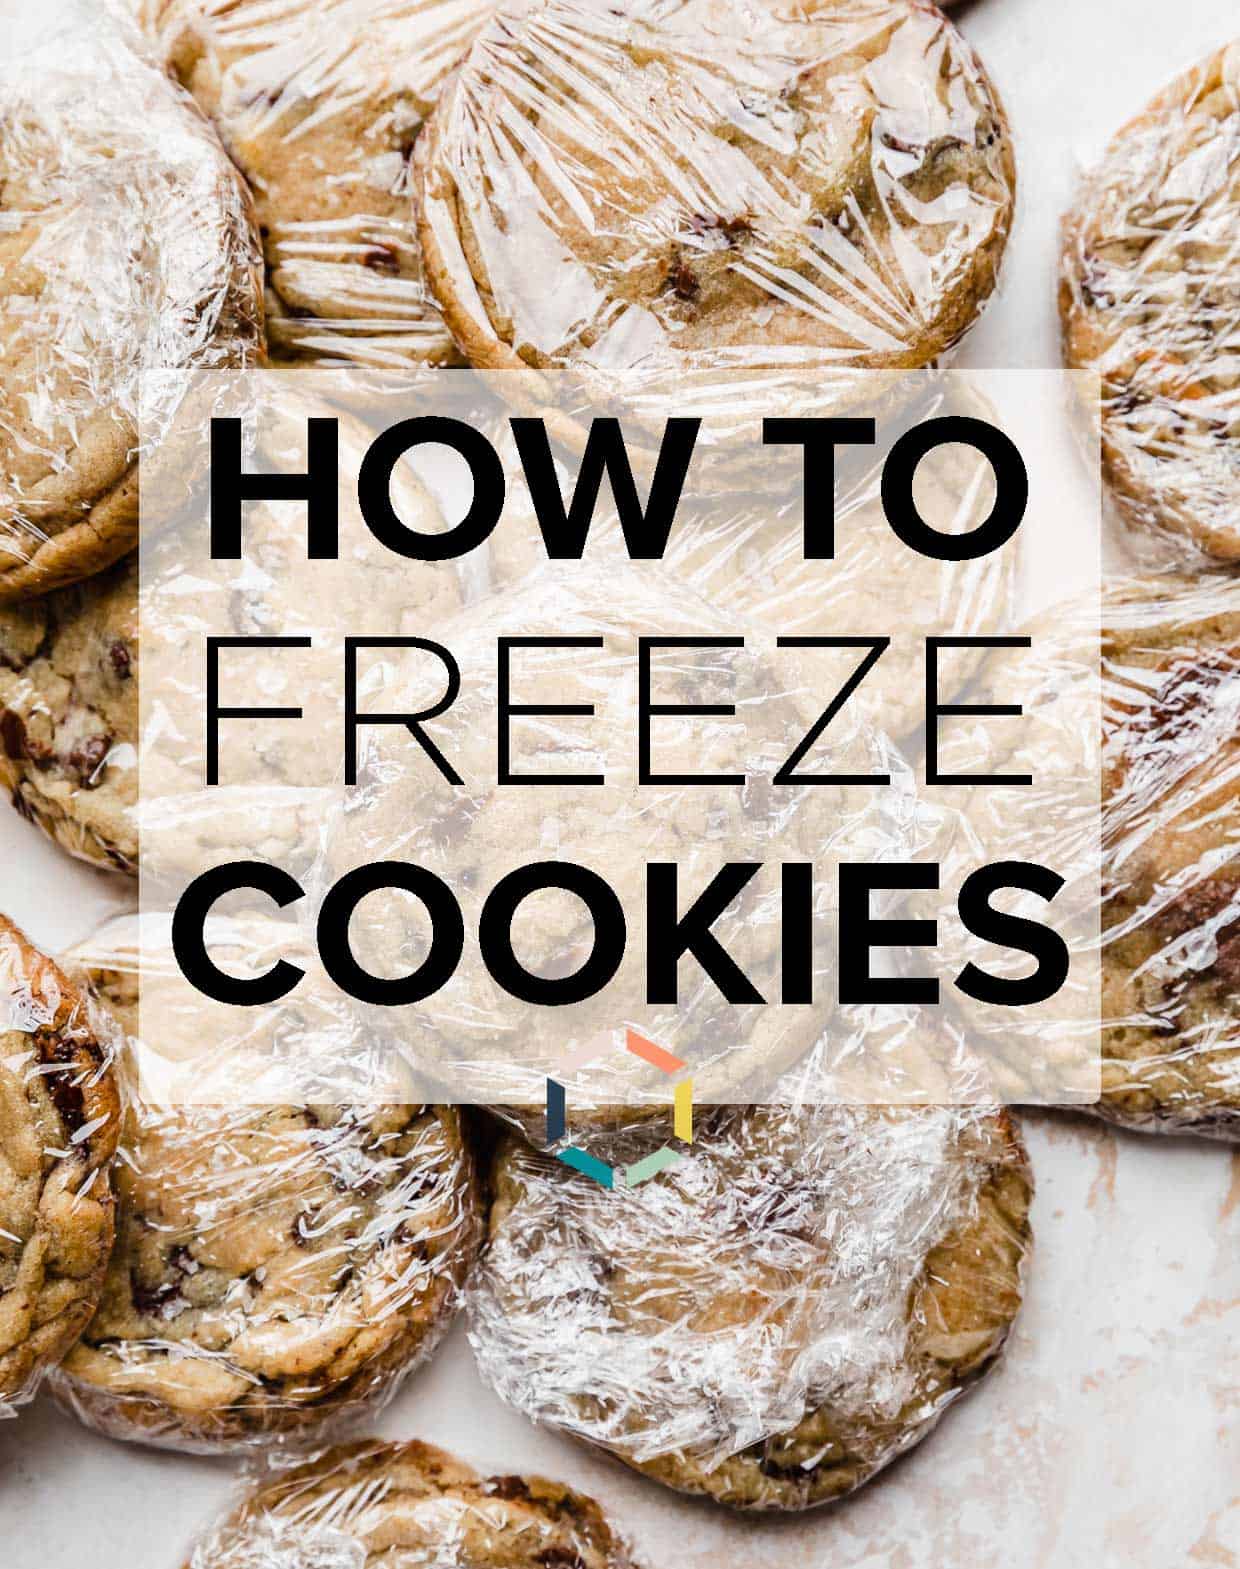 Cookies wrapped in plastic wrap with the words "How to Freeze Cookies" written in black text over the photo.